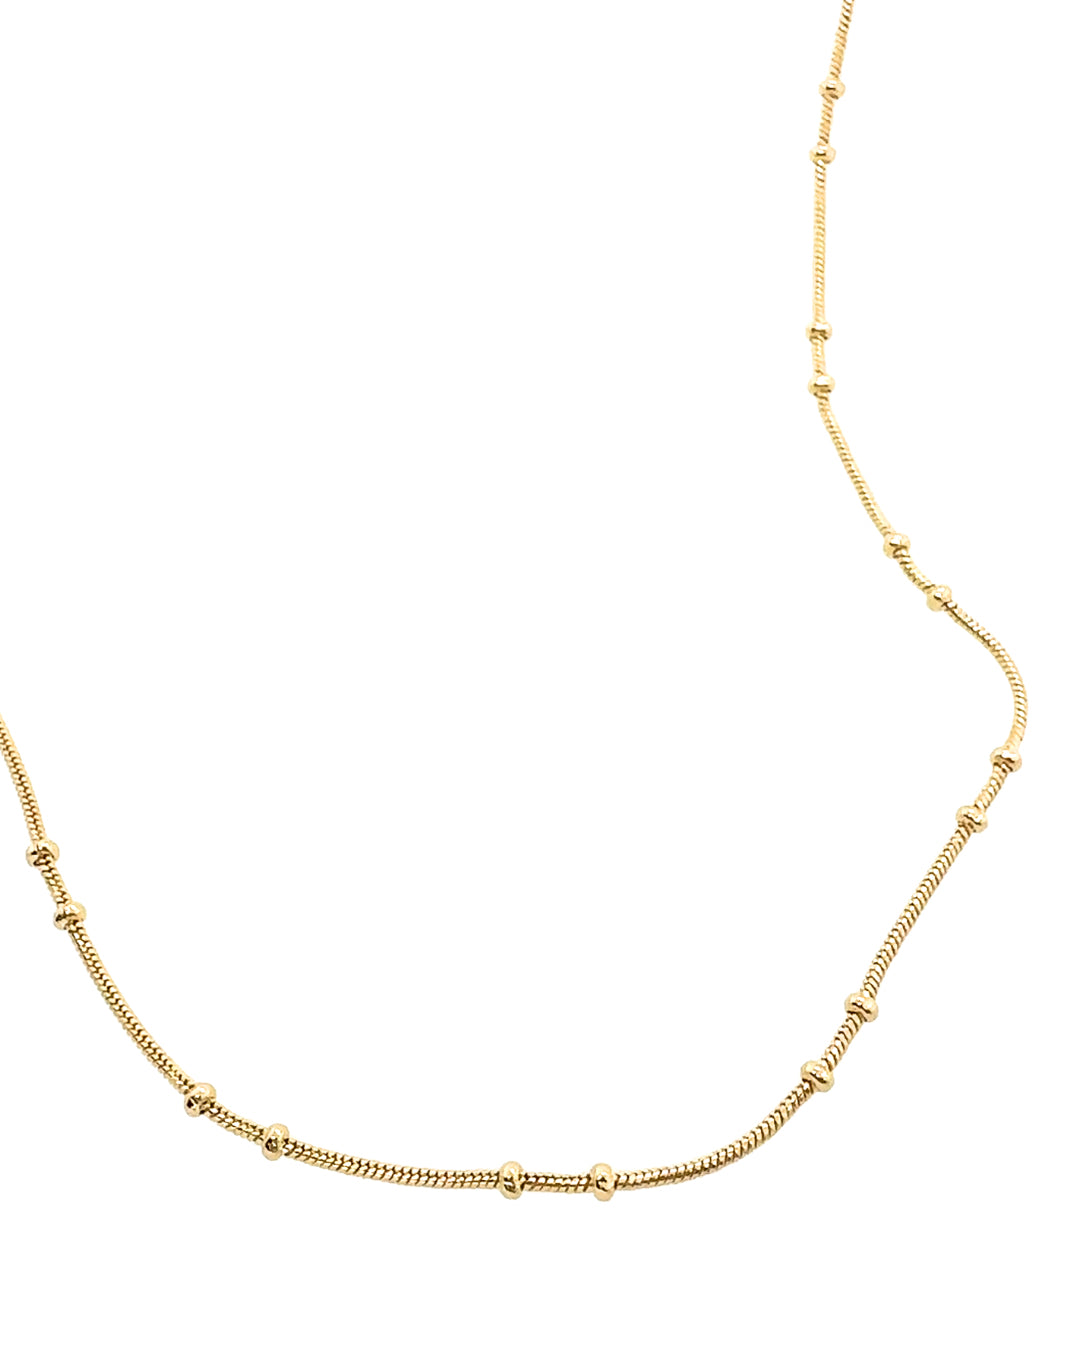 14k yellow gold fill beaded satellite chain necklace